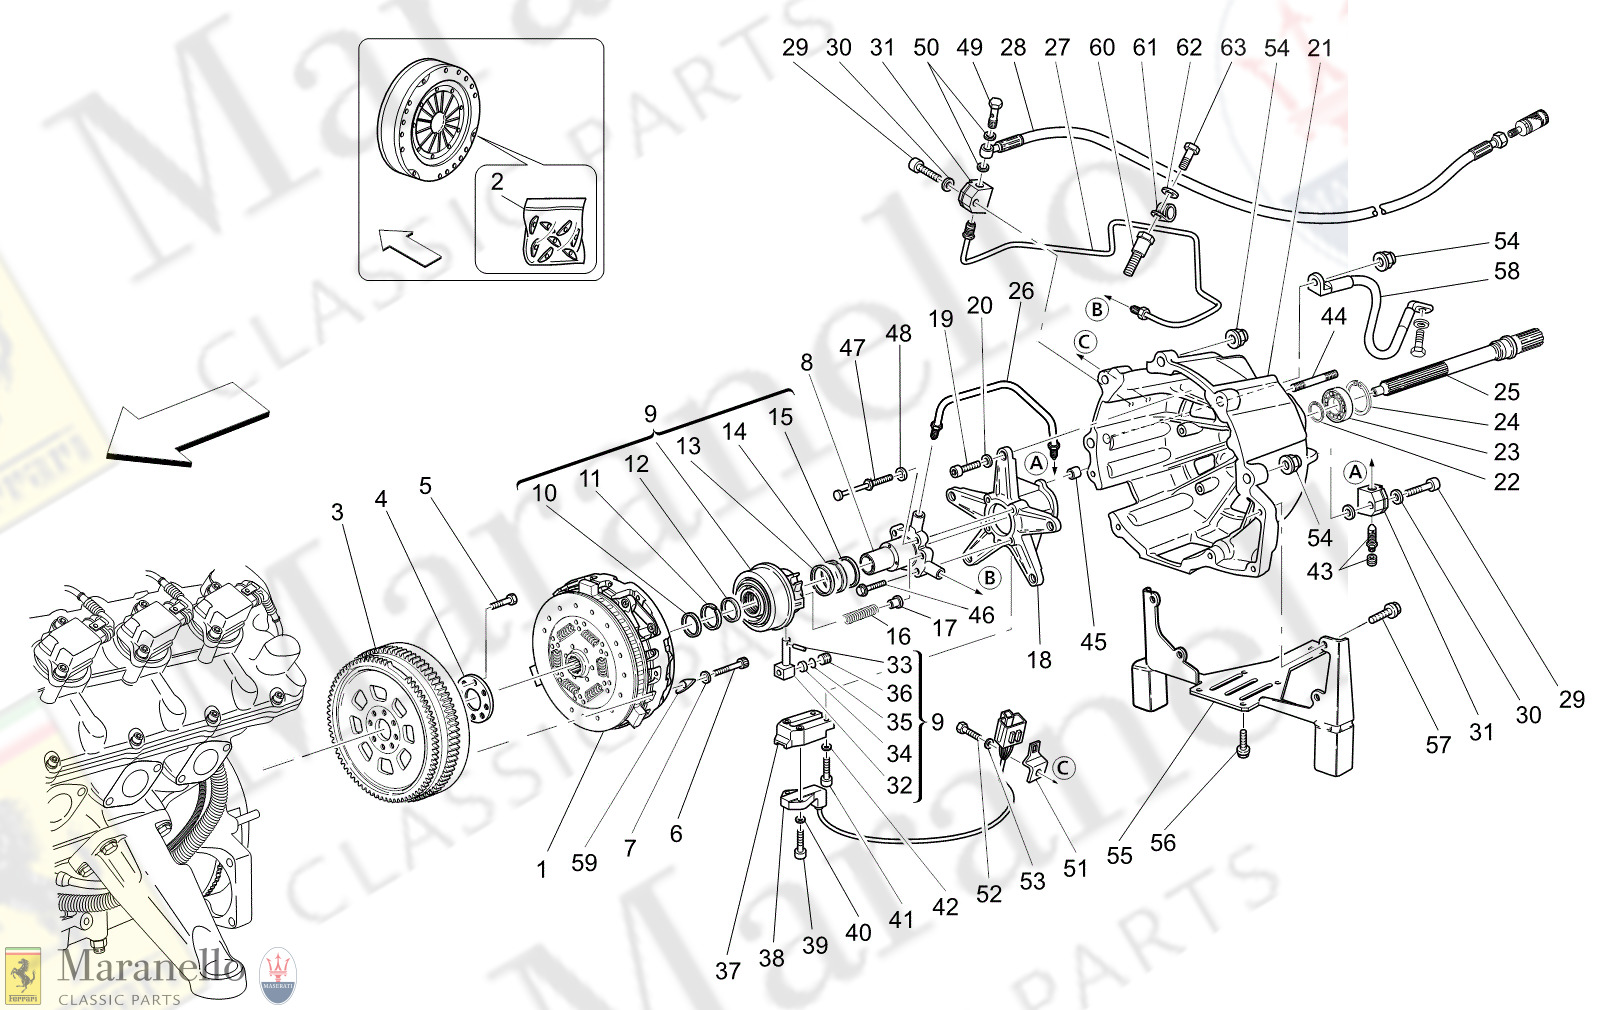 M2.11 - 1 - M211 - 1 Friction Discs And Housing For F1 Gearbox